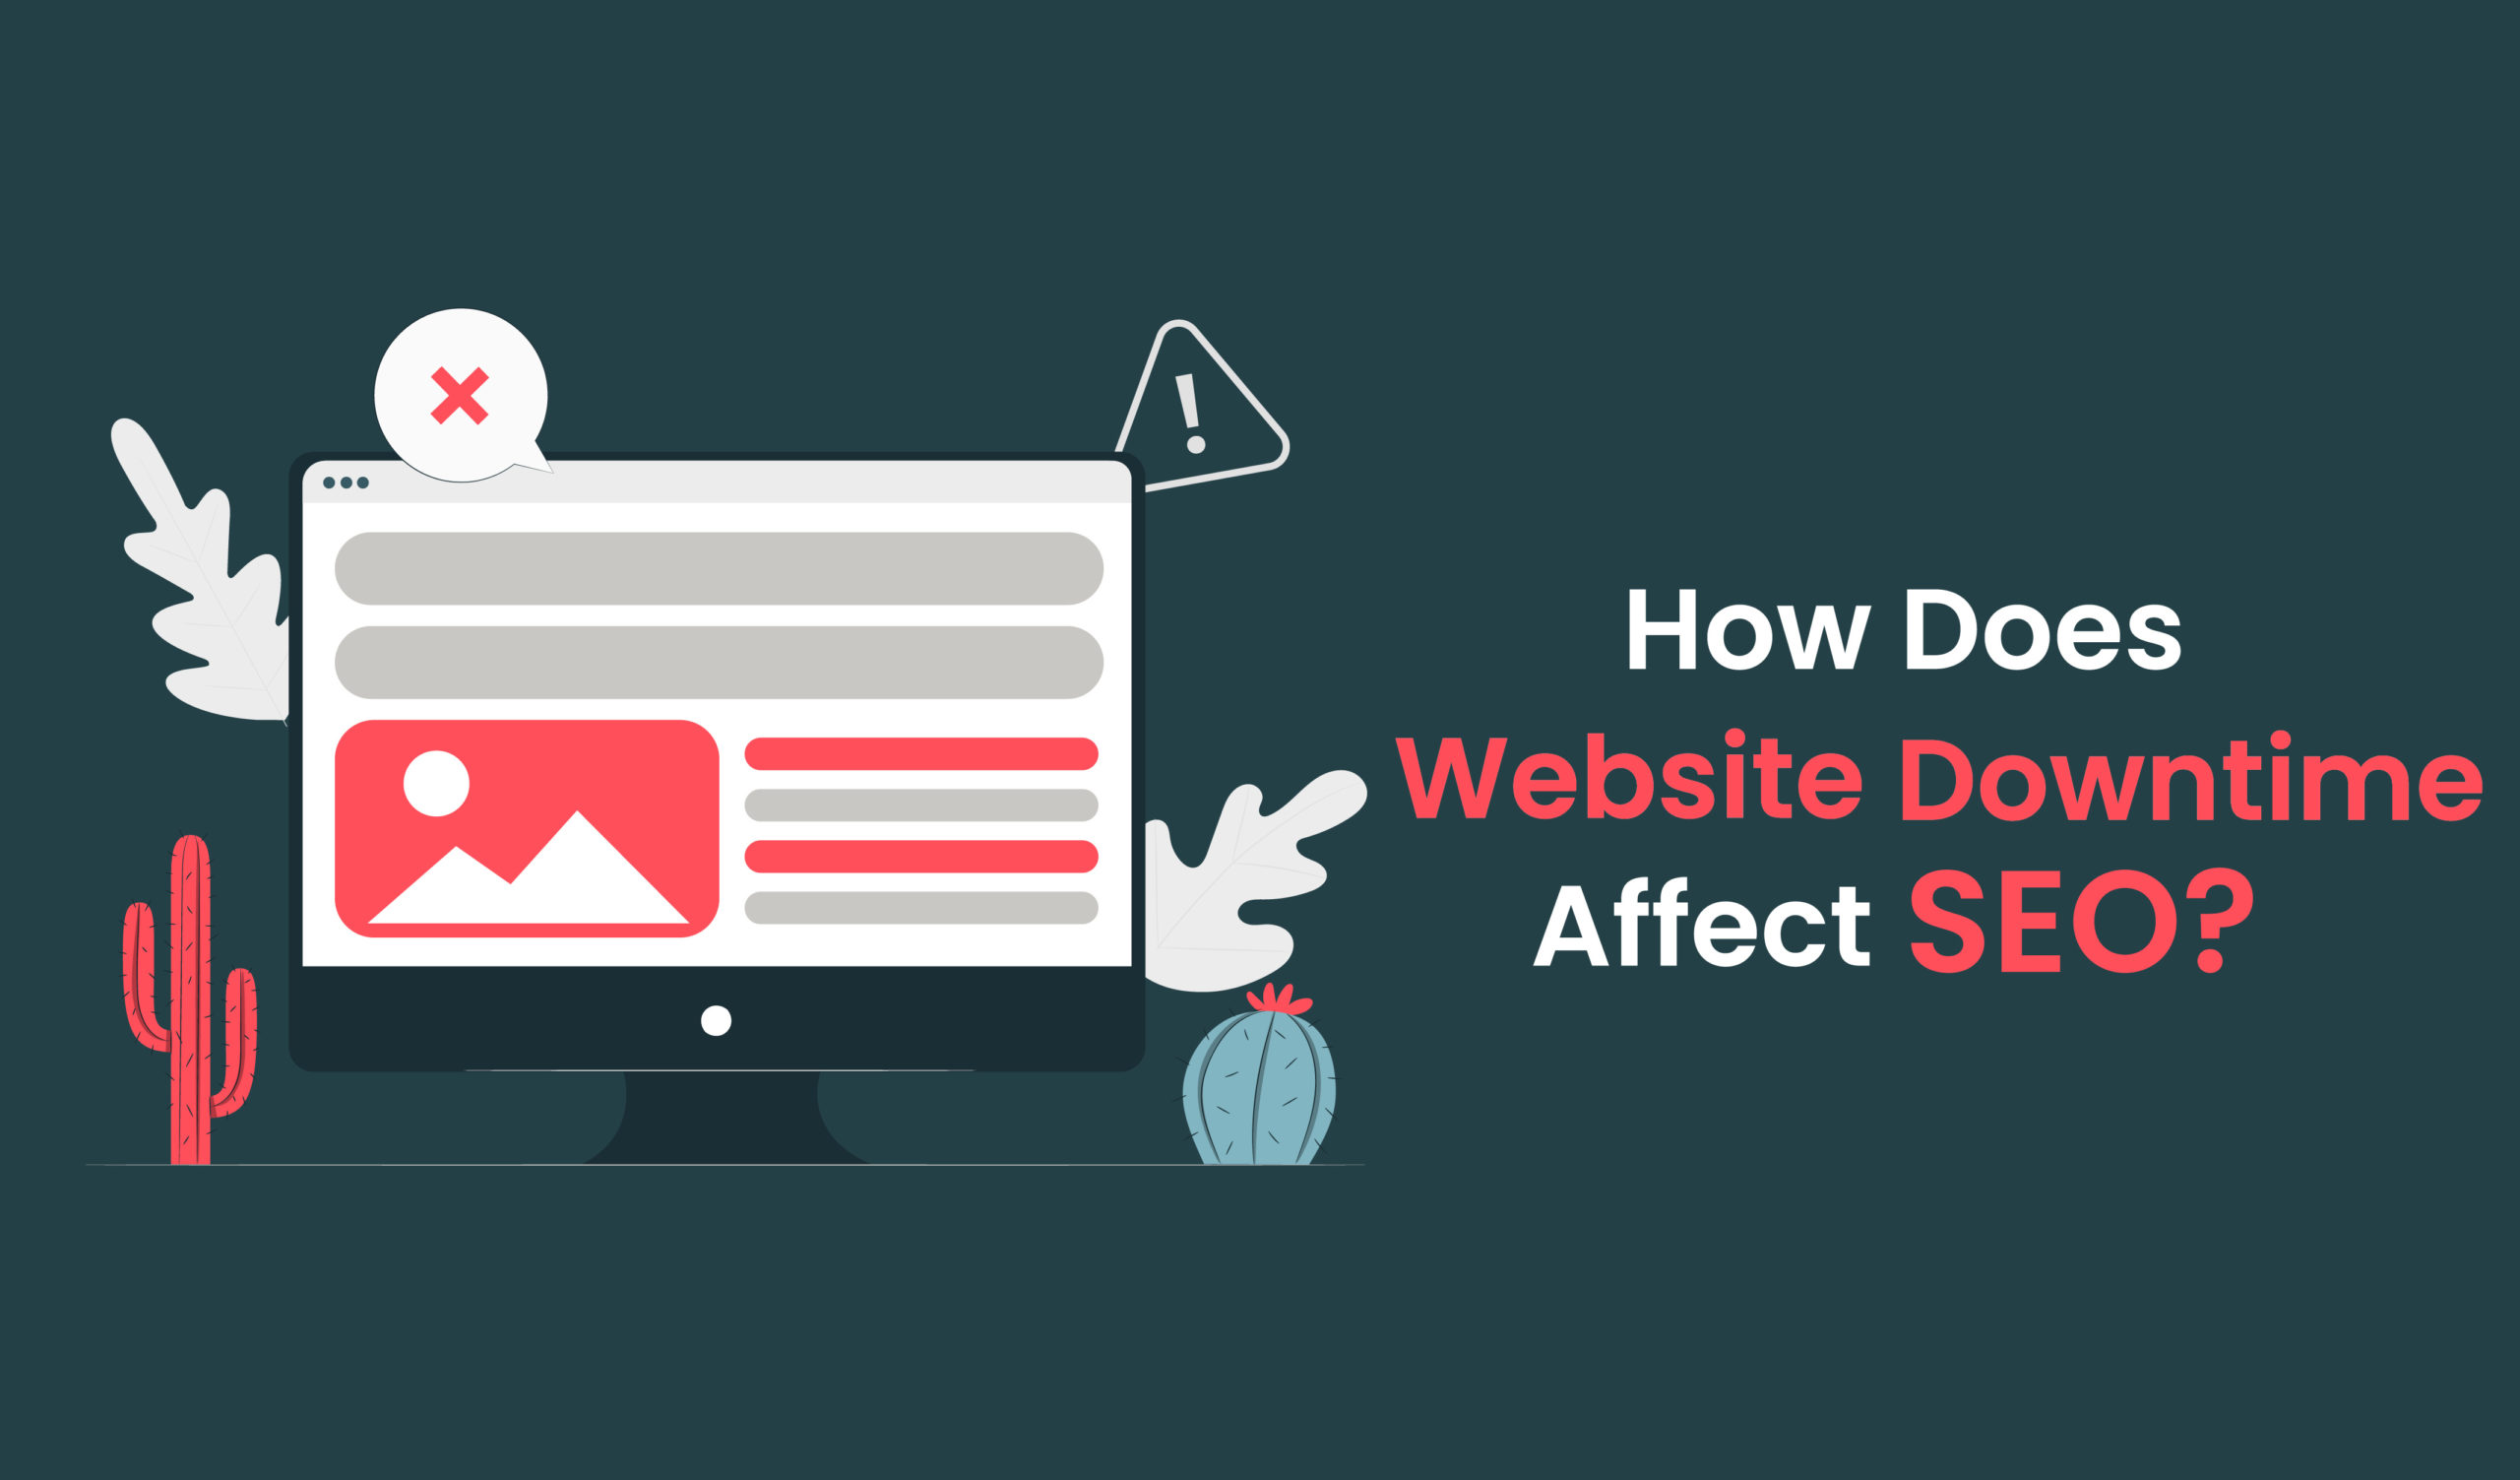 How Does Website Downtime Affect SEO?